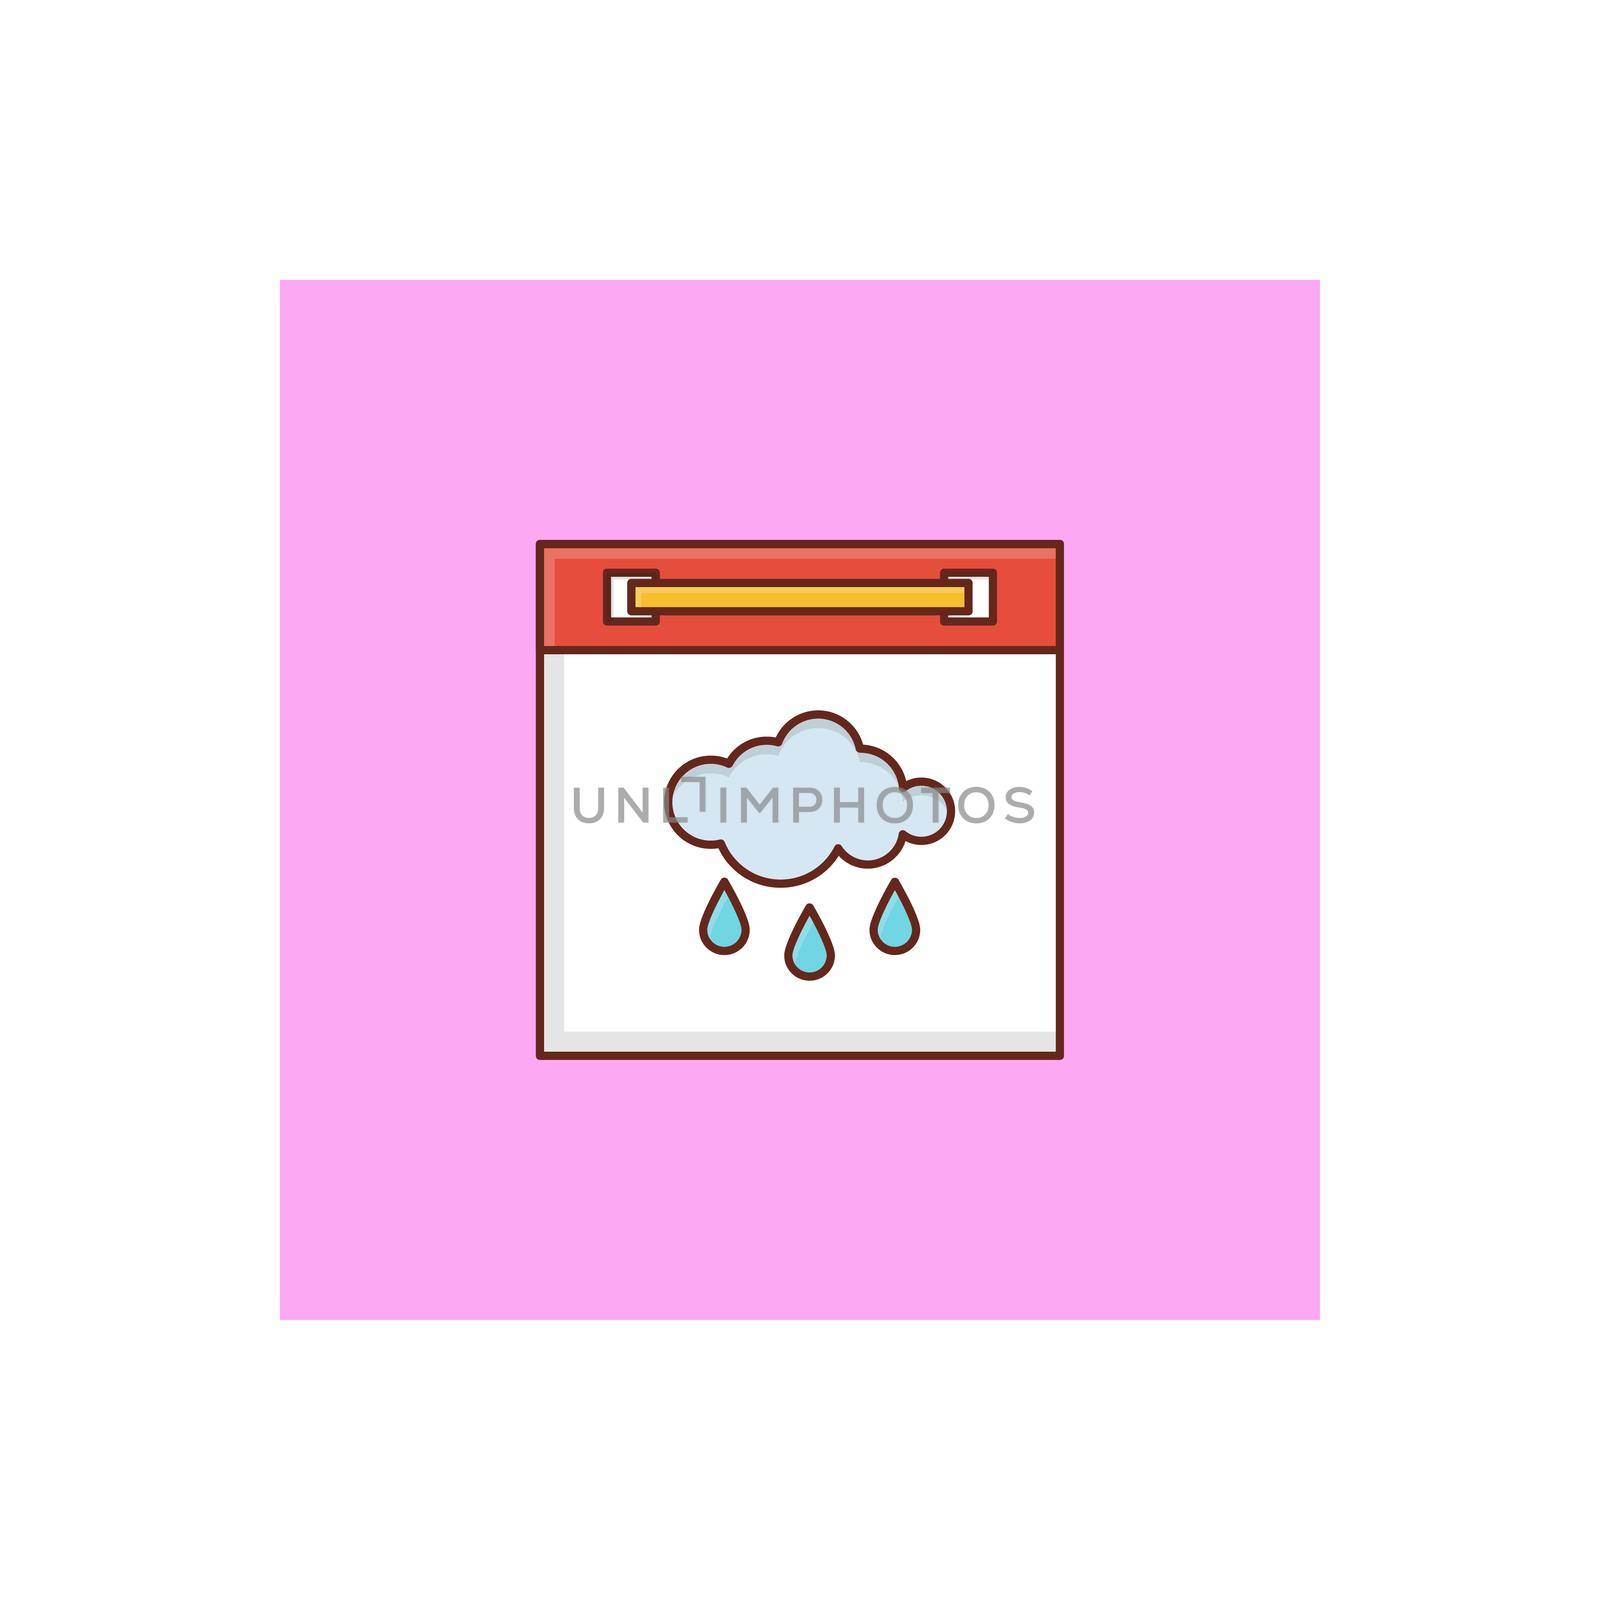 weather by FlaticonsDesign